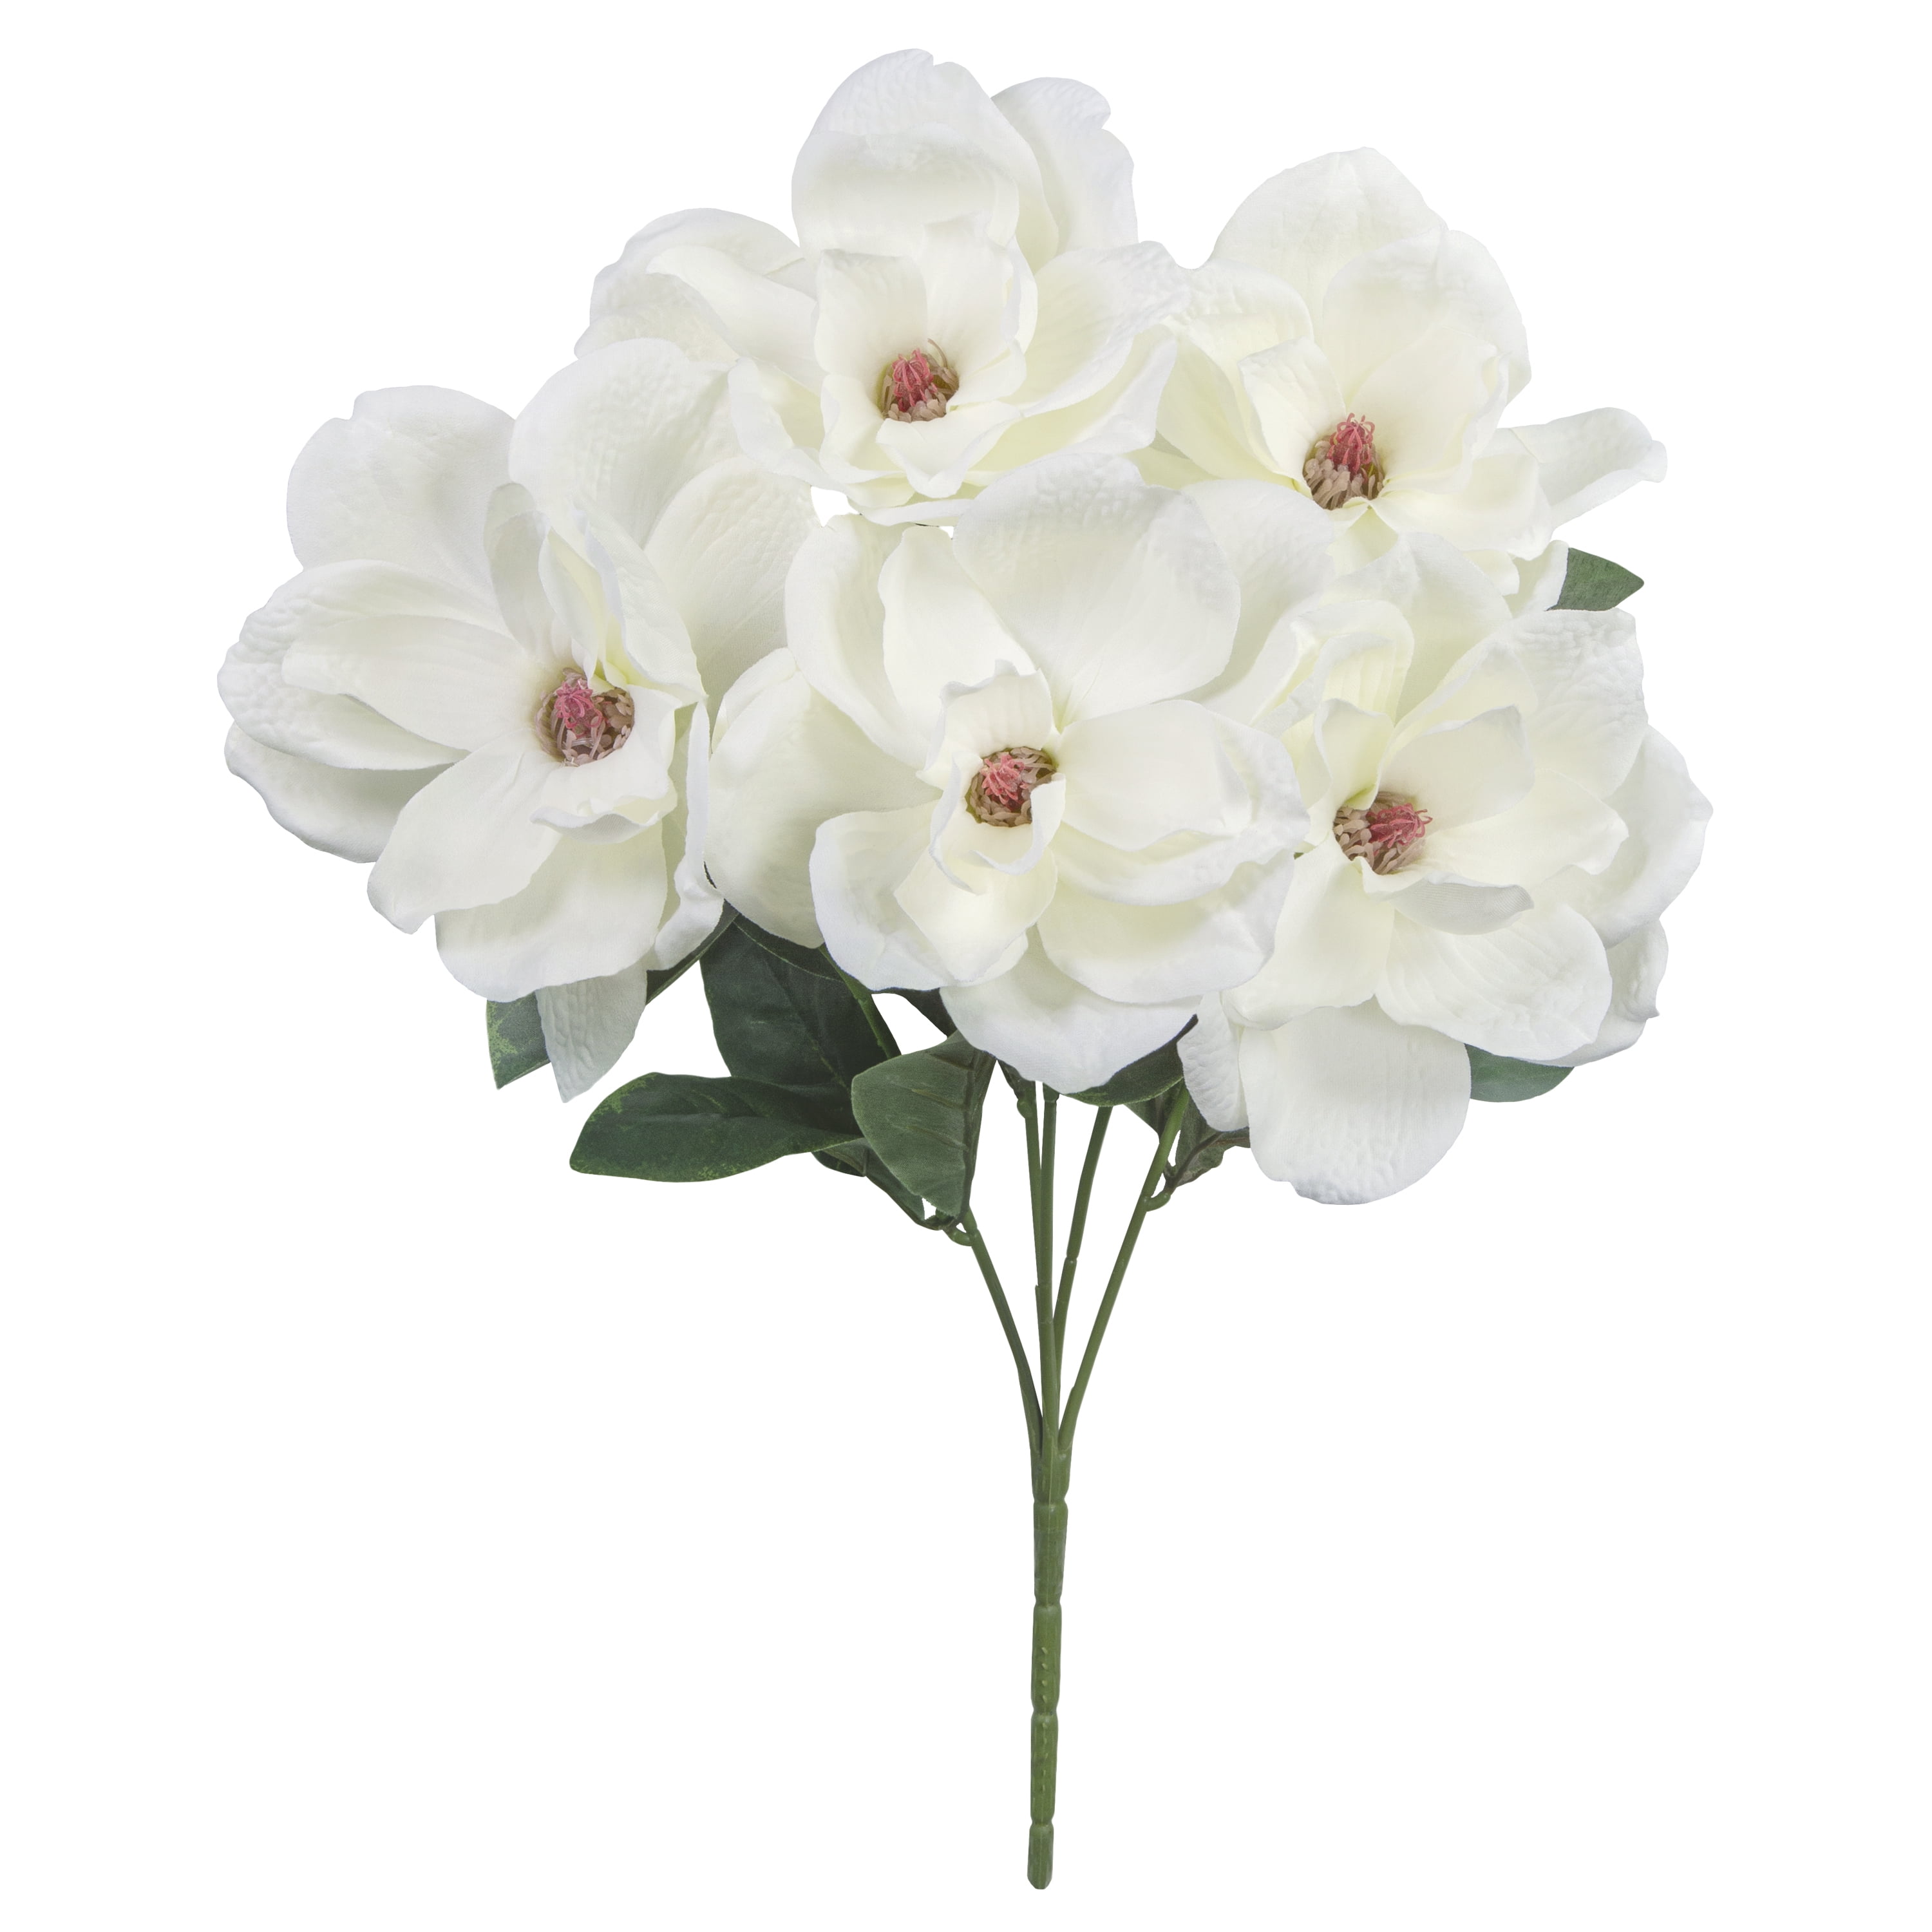 19" Artificial Silk White Magnolia Mixed Bush, by Mainstays